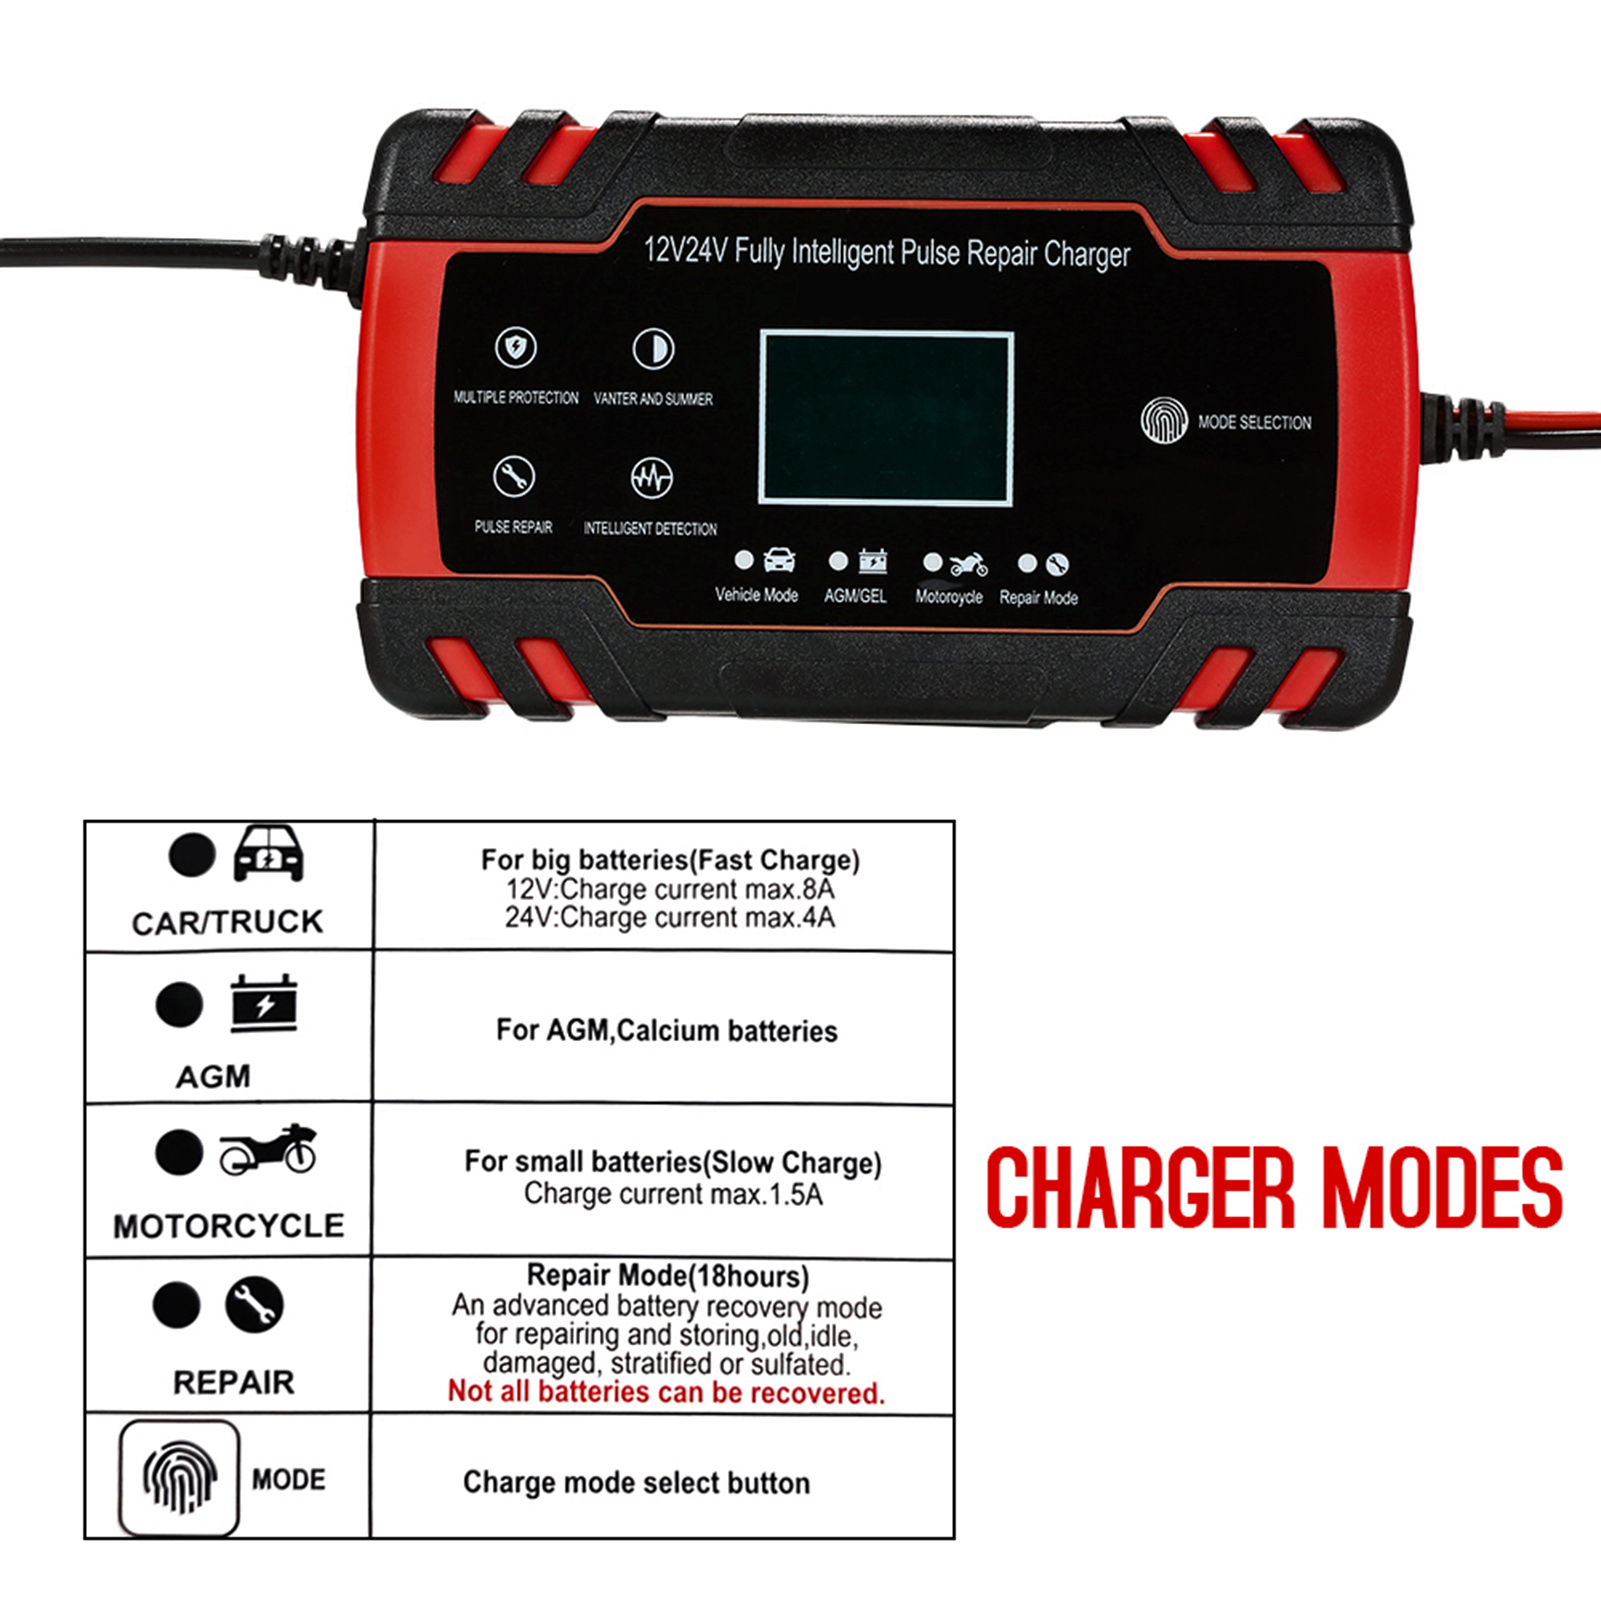 Full Automatic Car Battery Charger 12V 2A 24V 4A Intelligent Fast Power Charging Wet Dry Lead Acid Digital LCD Display